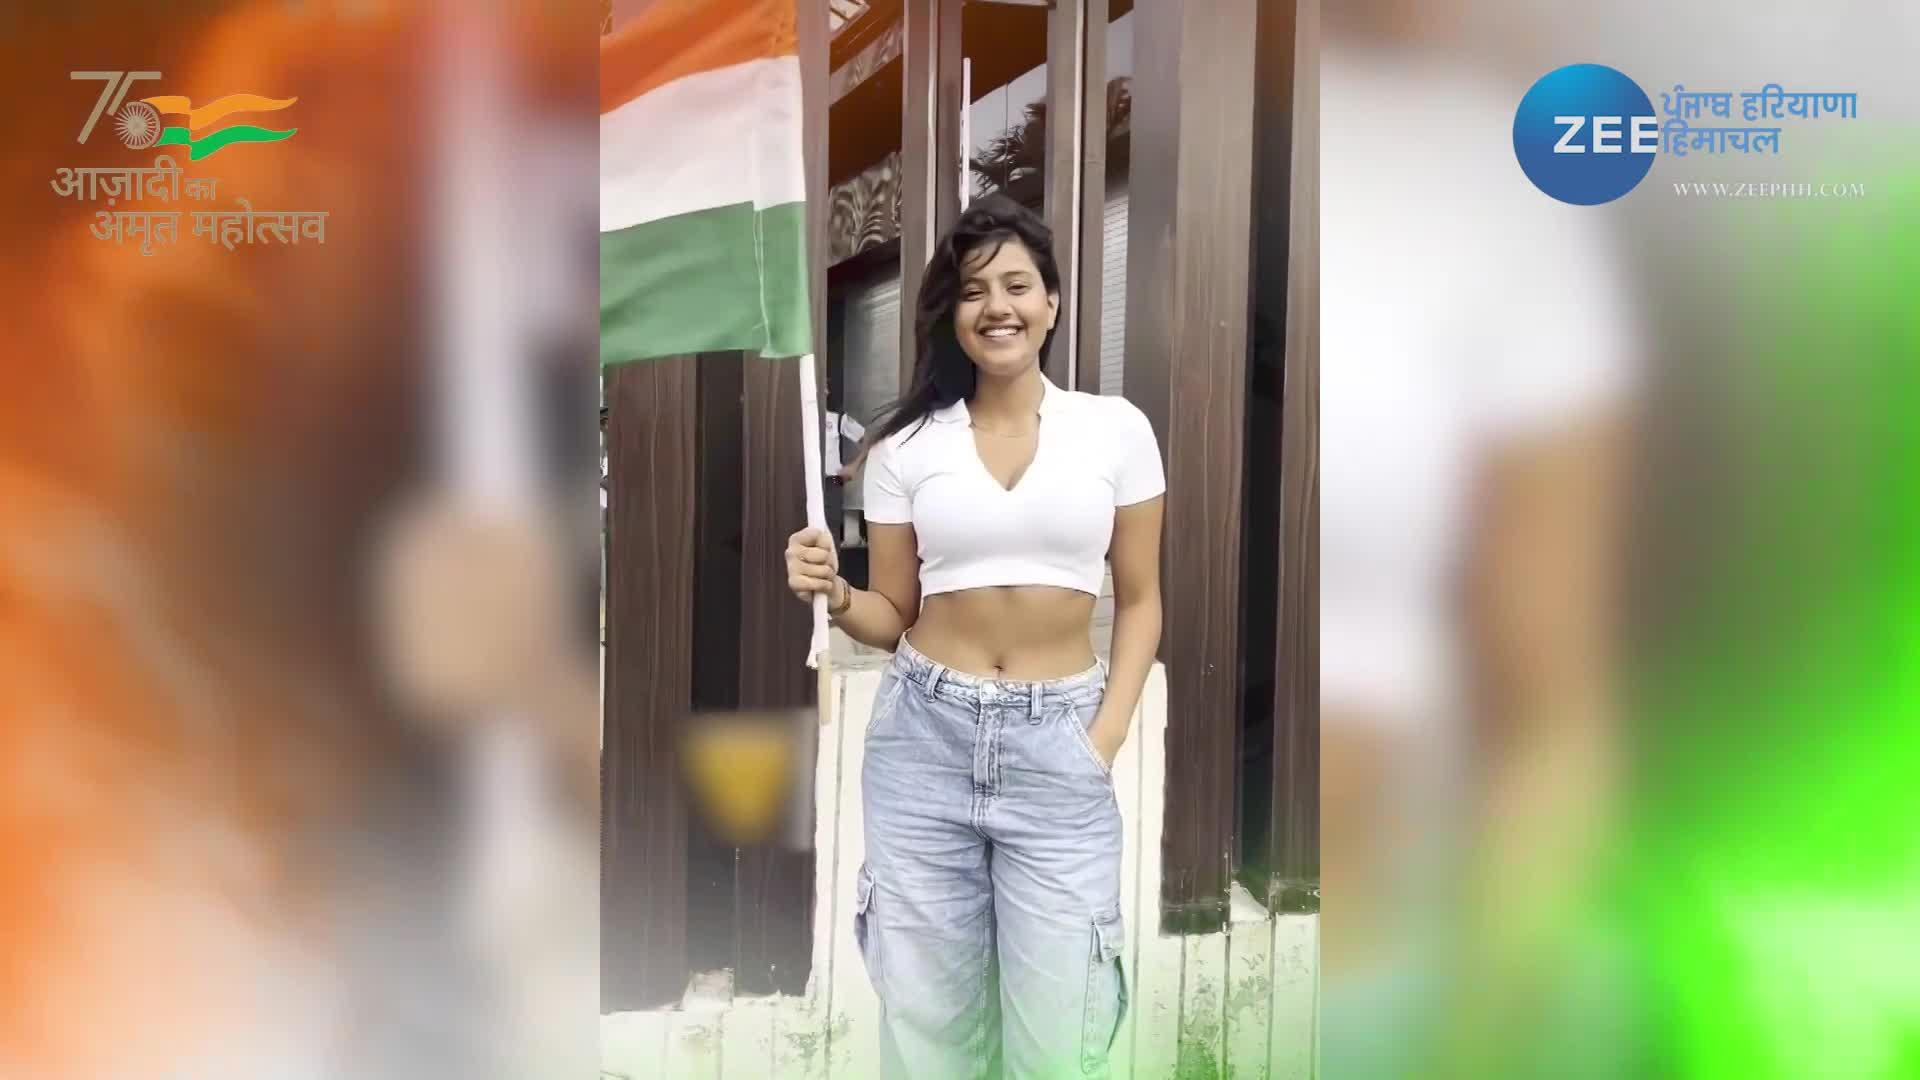 1920px x 1080px - Anjali Arora new video viral with flag after mms watch full video plrh |  anjali arora video: à¤…à¤‚à¤œà¤²à¤¿ à¤…à¤°à¥‹à¤¡à¤¼à¤¾ à¤•à¤¾ à¤à¤• à¤”à¤° à¤µà¥€à¤¡à¤¿à¤¯à¥‹ à¤¹à¥‹ à¤°à¤¹à¤¾ à¤µà¤¾à¤¯à¤°à¤², à¤¯à¥‚à¤œà¤°à¥à¤¸ à¤•à¤°  à¤œà¤®à¤•à¤° à¤Ÿà¥à¤°à¥‹